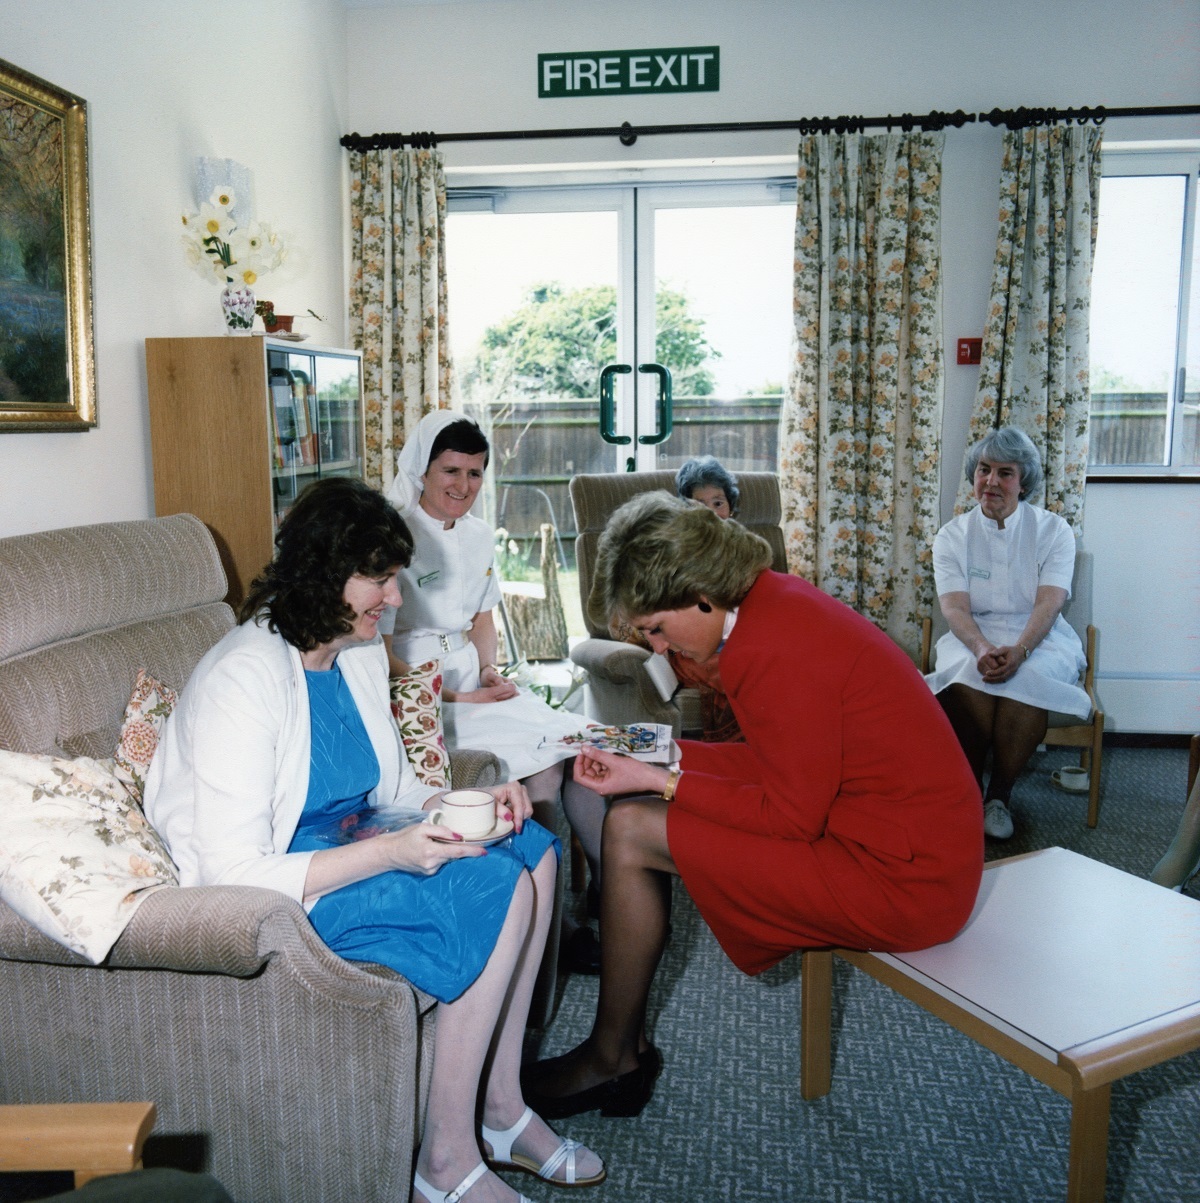 Handiwork - patient Pauline Budd presents a tapestry she had completed at the Joan Tomkins day centre to Princess Diana